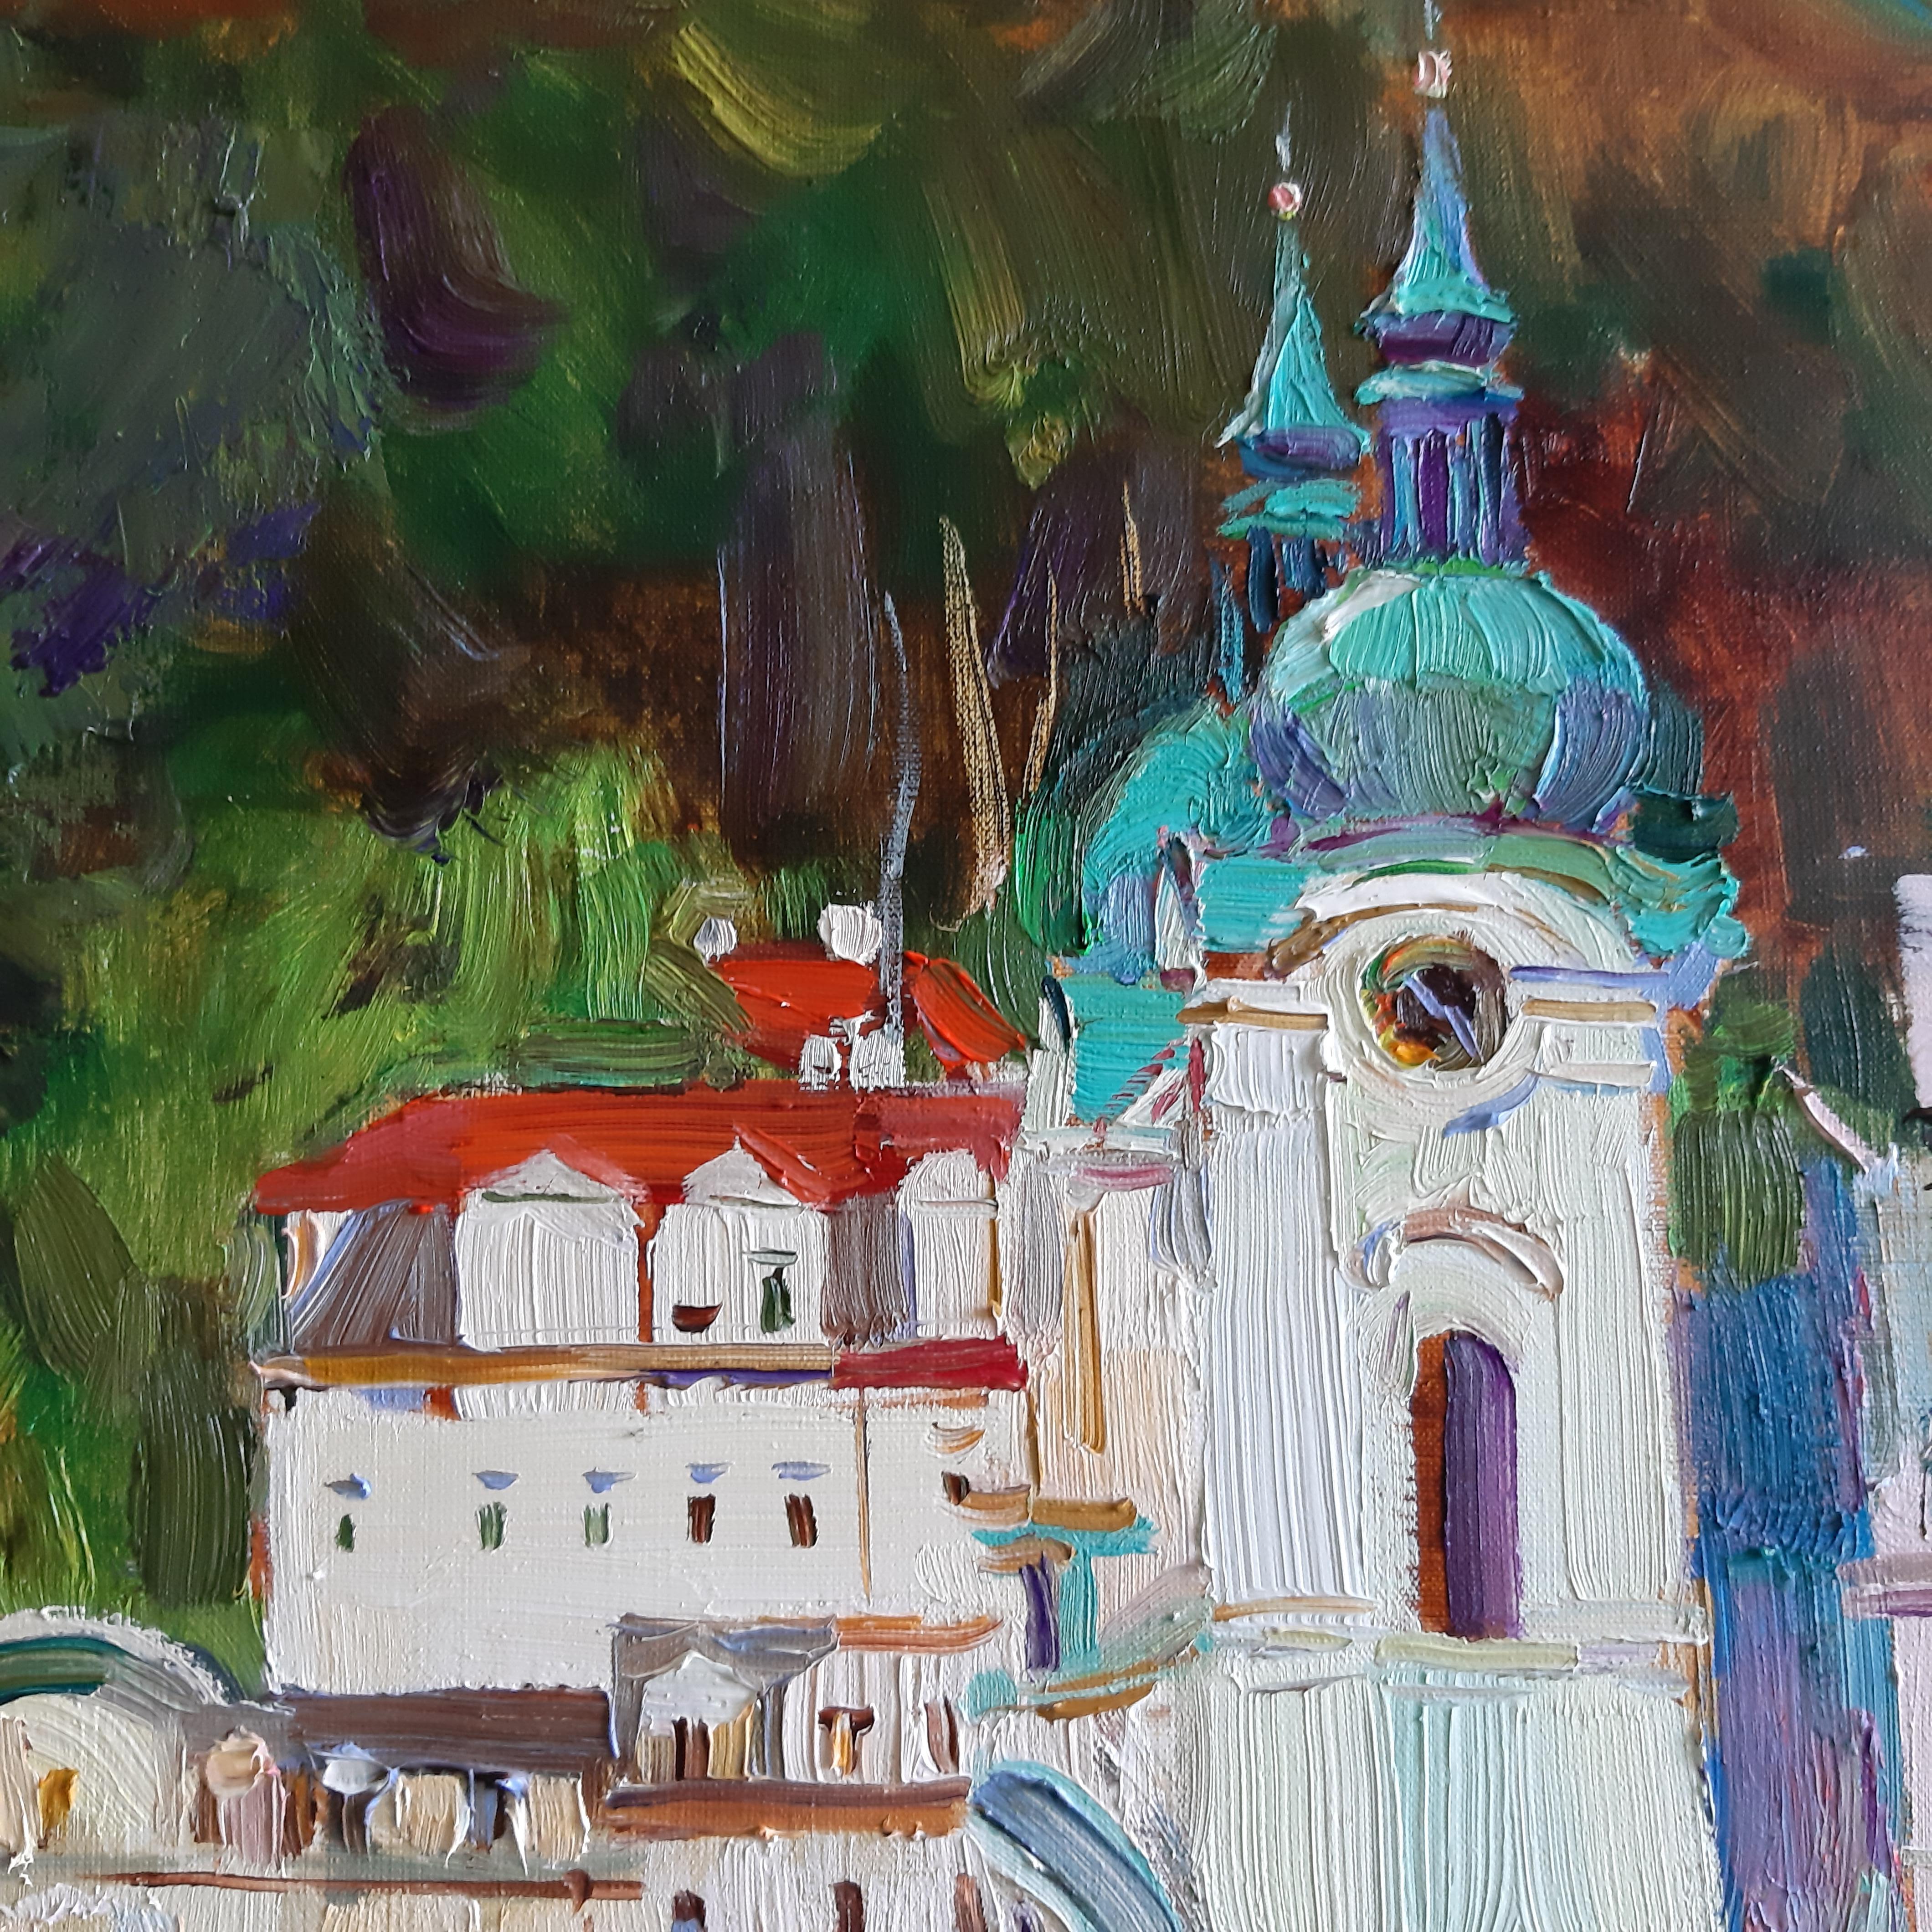 Karlovy Vary, Day of Holiday - Landscape Oil Painting Blue White Green Brown  - Gray Landscape Painting by Alina Khrapchynska